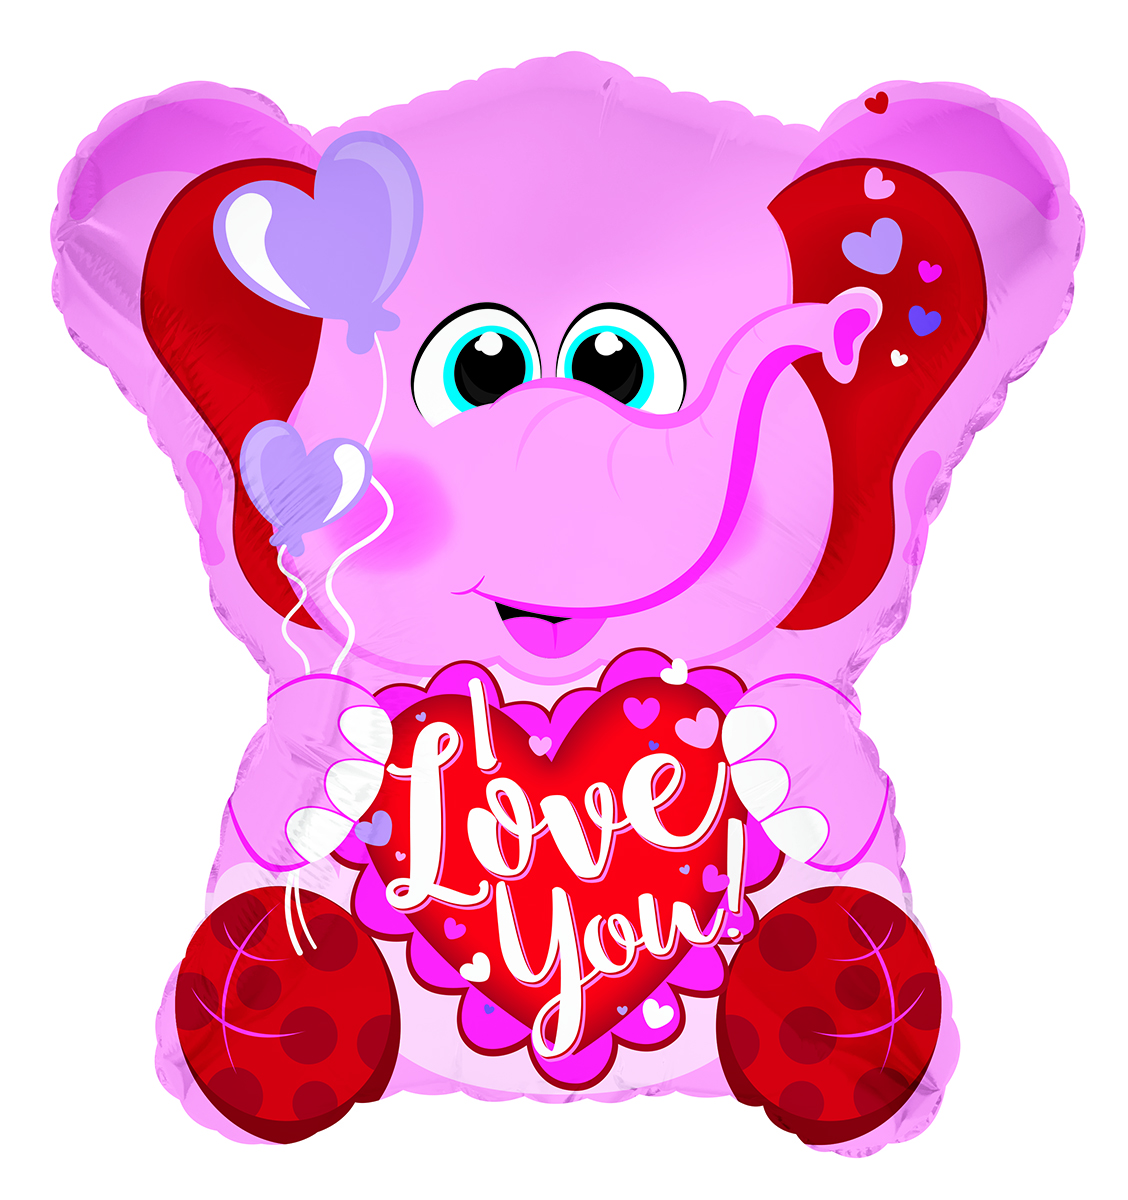 https://cdn.bargainballoons.com/products/2020-11-30-Balloons/Large-Balloons/434180-26-inches-I-Love-You-Pink-Elephant-Foil-balloons.jpg